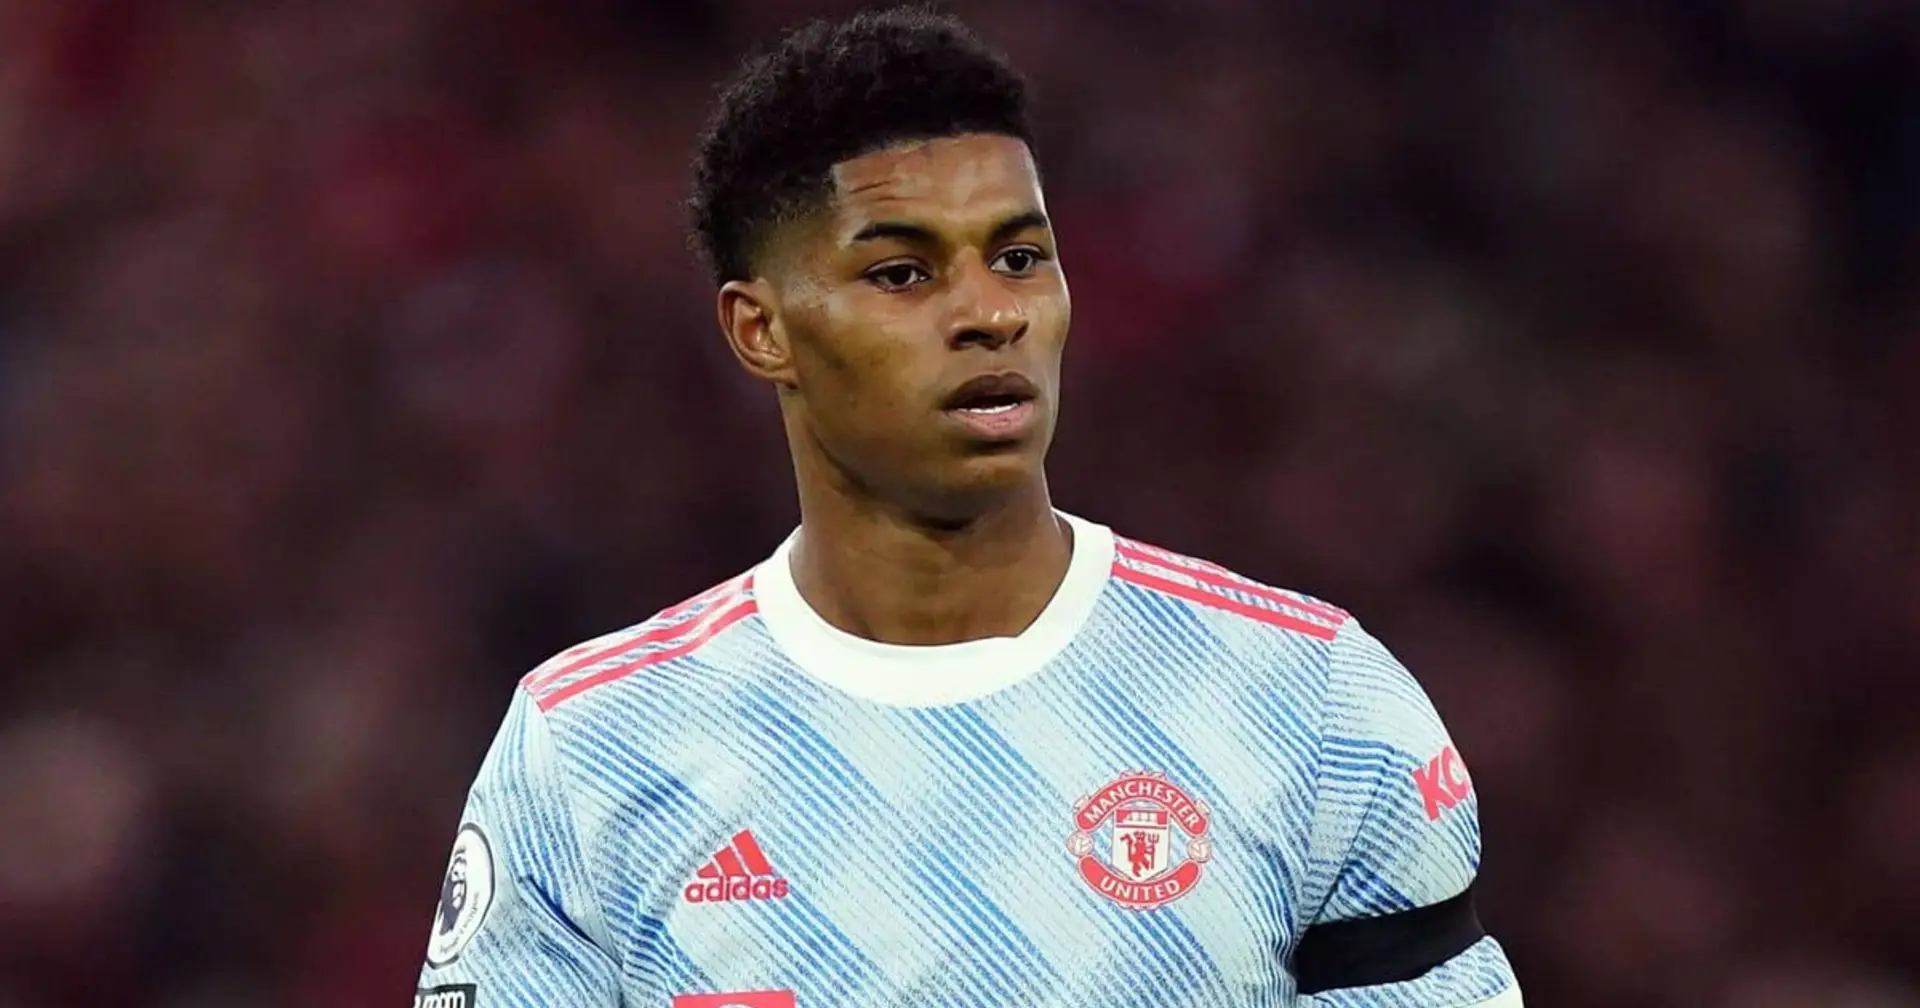 Rashford sues Egyptian student for vile racial abuse - sends 10 lawyers to fight his case